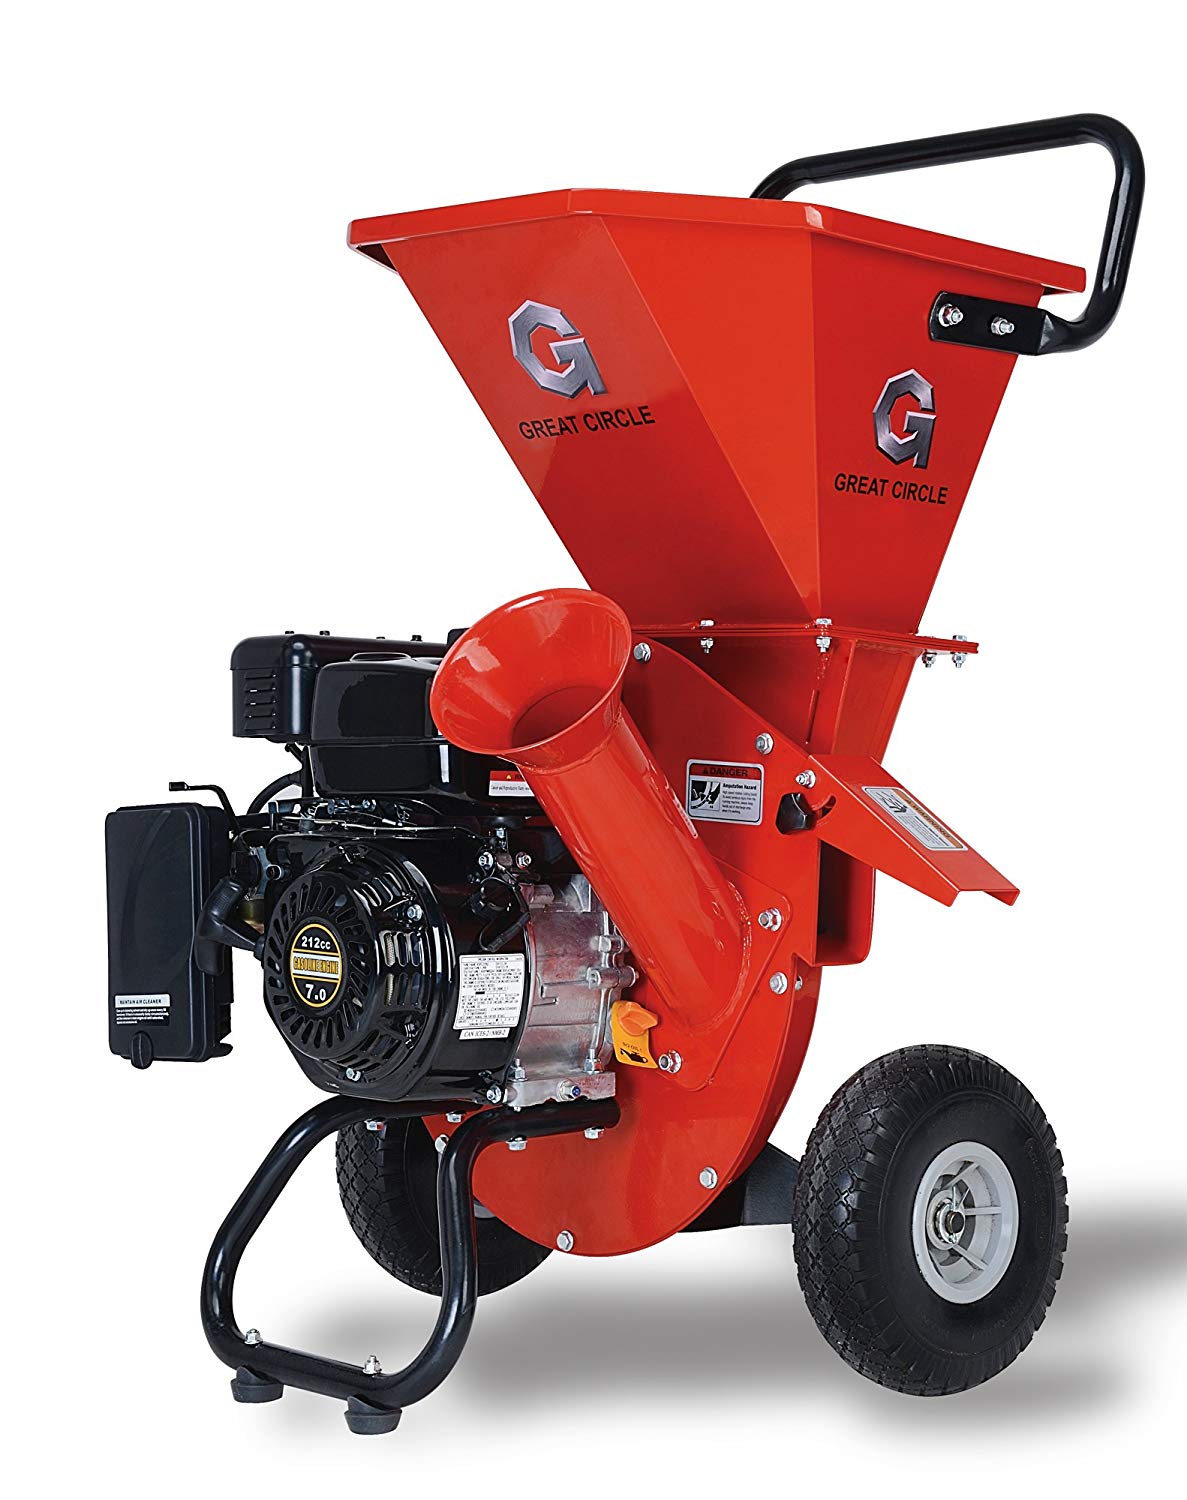 GreatCircleUSA 7HP Heavy Duty 212cc Gas Powered 3 in 1 Multi-Function Pro Wood Chipper Shredder with 3" max Wood Diameter Capacity, 3 Years Warranty, CARB & EPA Certified, Can Ship to California